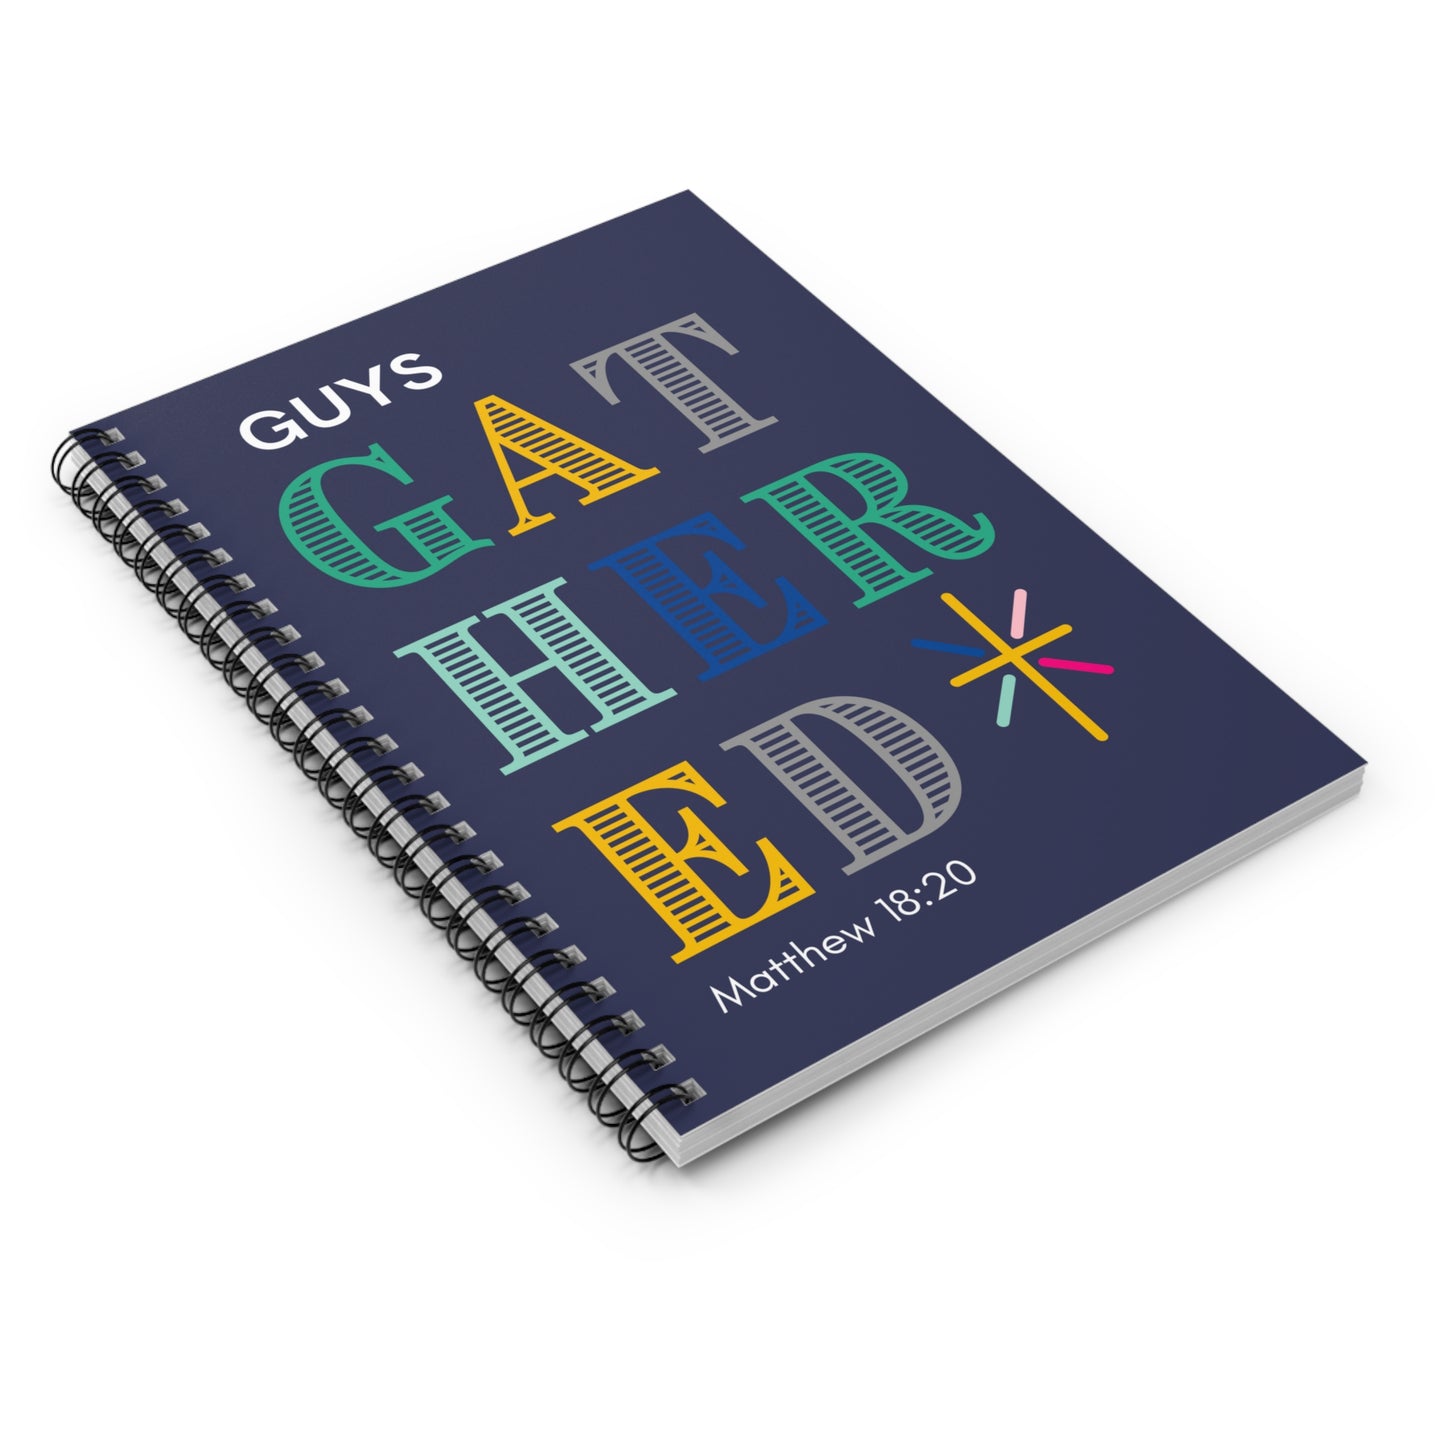 GUYS Spiral Notebook (Colors)